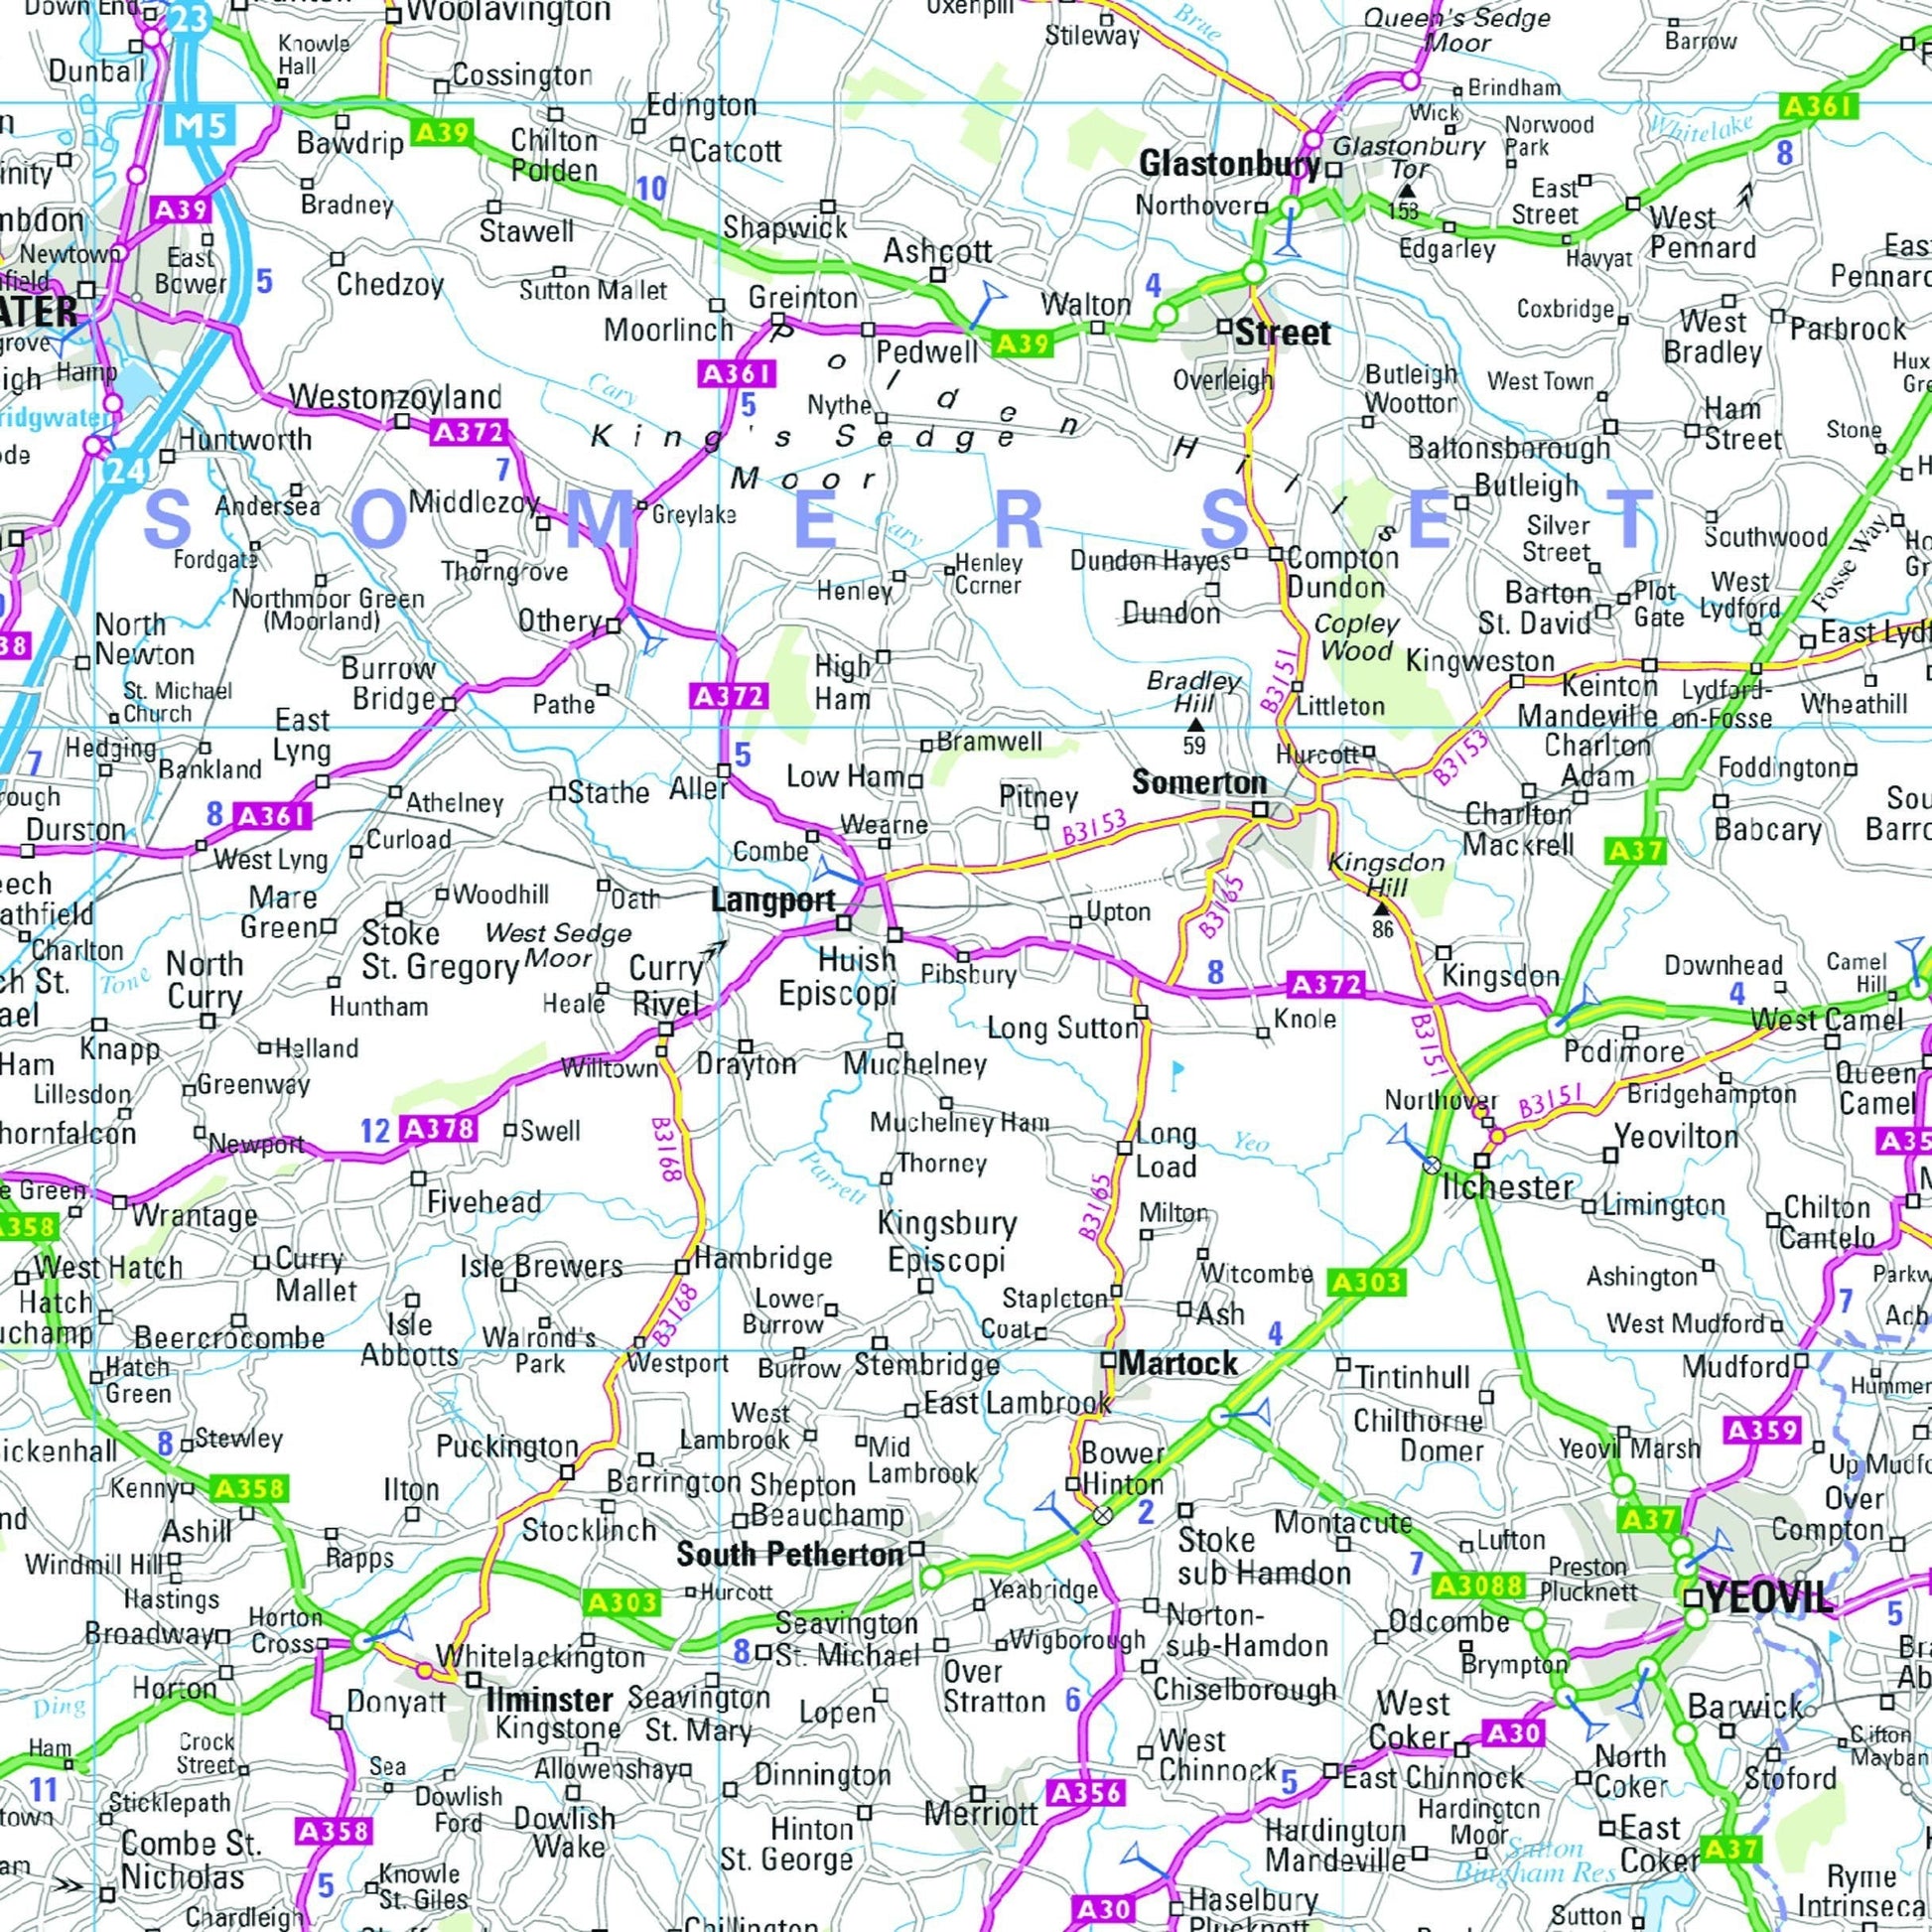 Wall Maps - South West England And South Wales Regional Road Map - Wall Map 7